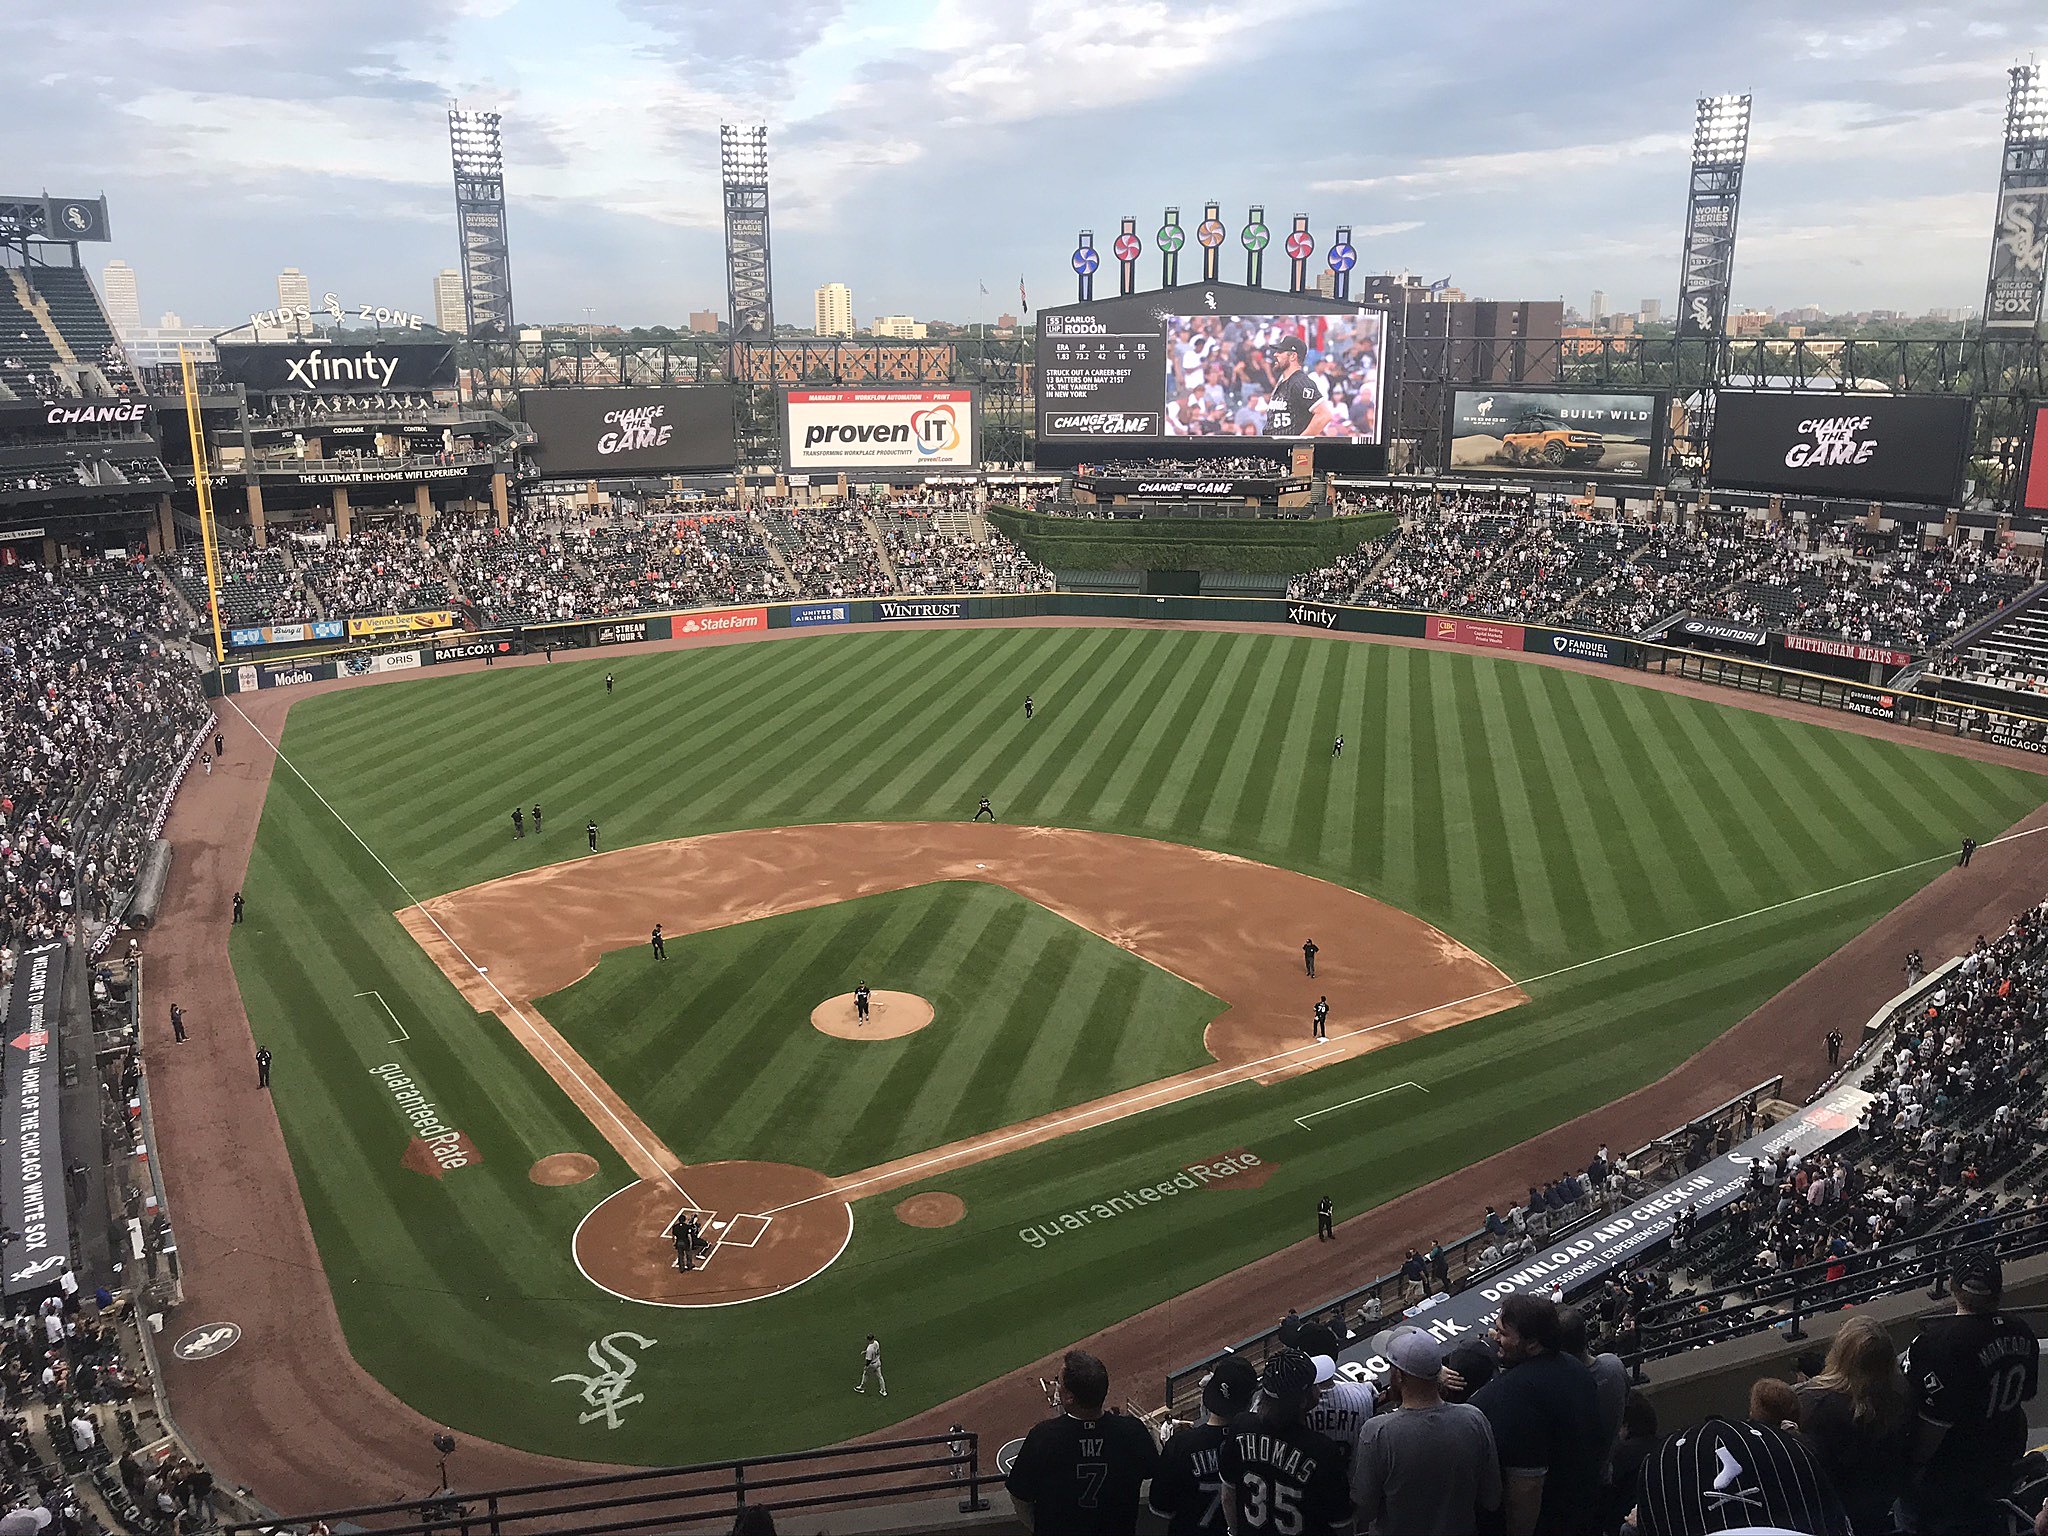 It's Official, Sox Fans: 'The Cell' Is Now Guaranteed Rate Field